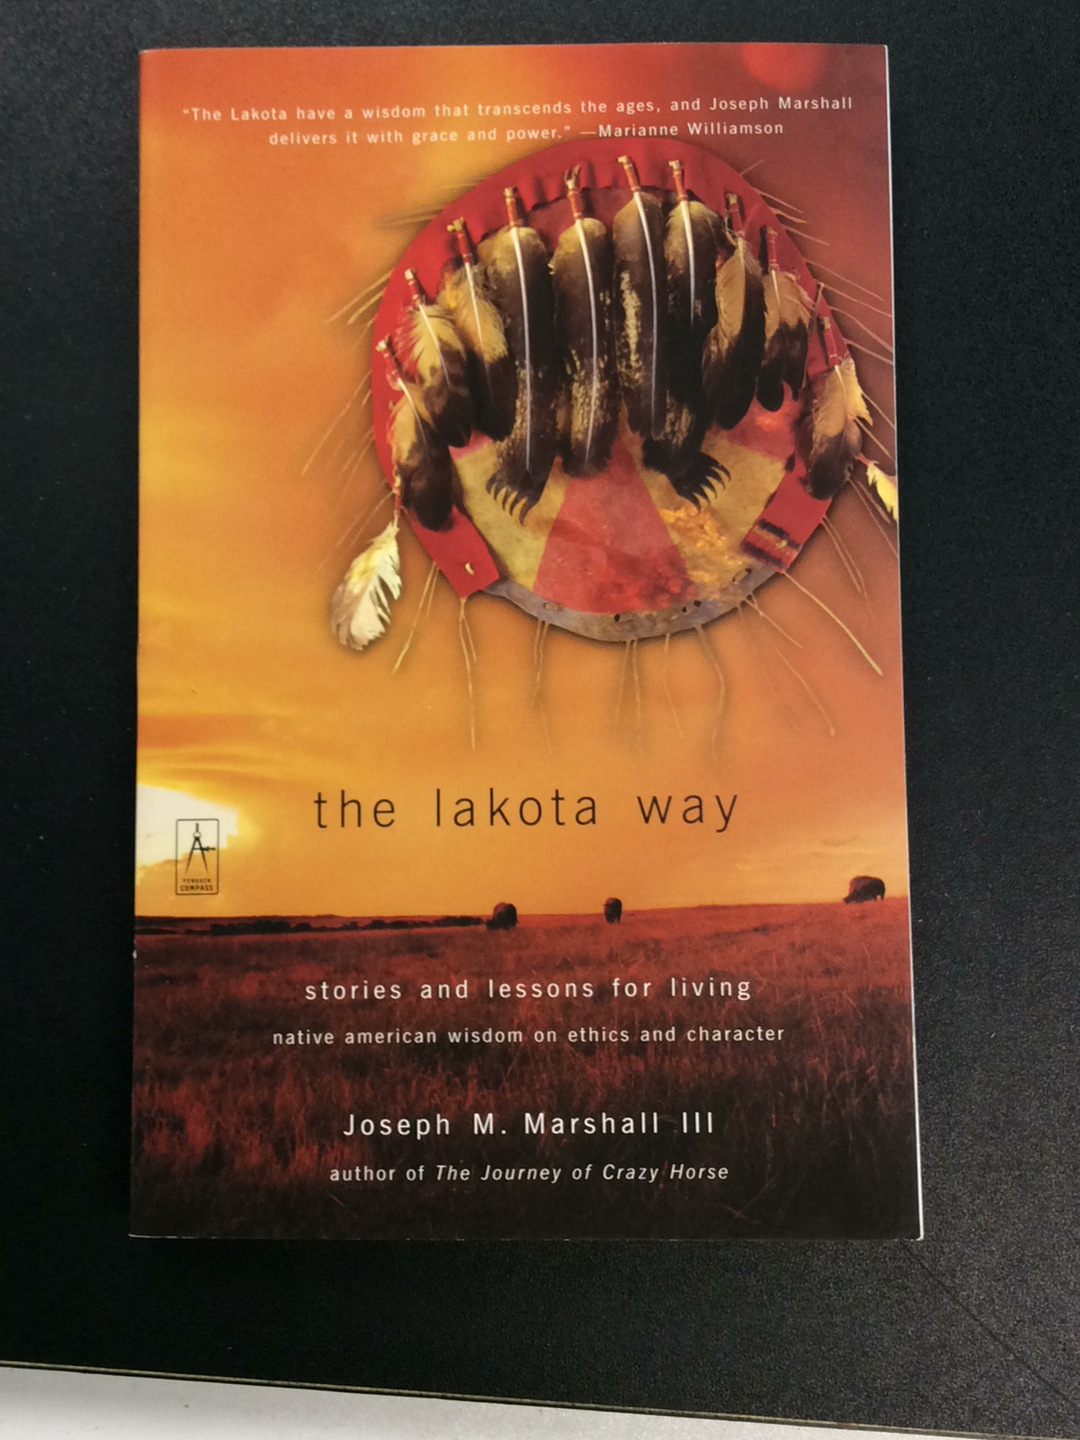 The Lakota Way: Stories and Lessons for Living Native American Wisdom on Ethics and Character